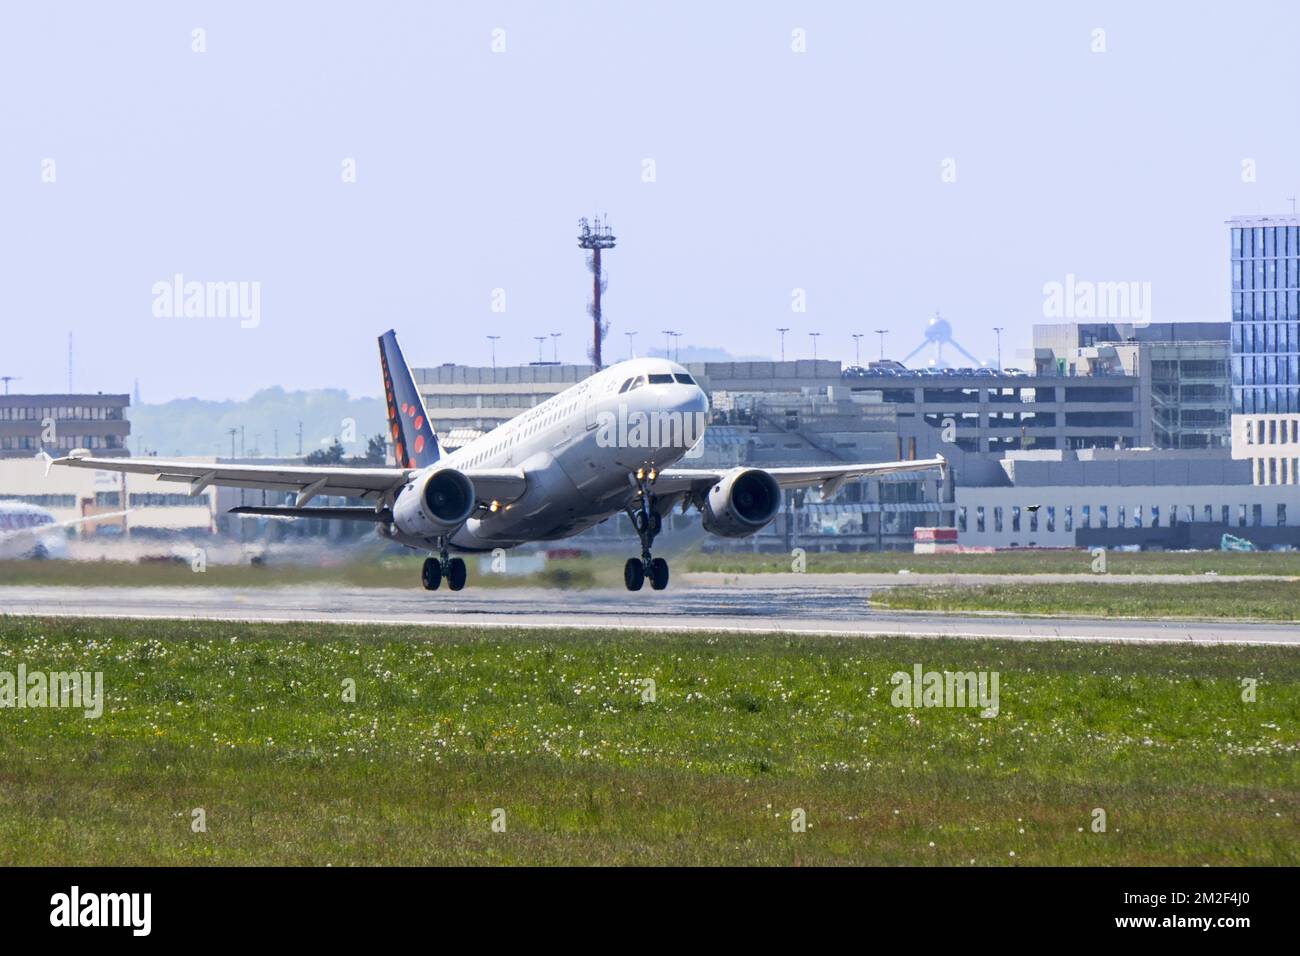 Airbus A319-111 from Brussels Airlines taking off from runway at the Brussels-National airport, Zaventem, Belgium | Airbus A319-111 de Brussels Airlines à l'aéroport de Bruxelles-National, Zaventem, Belgique 06/05/2018 Stock Photo